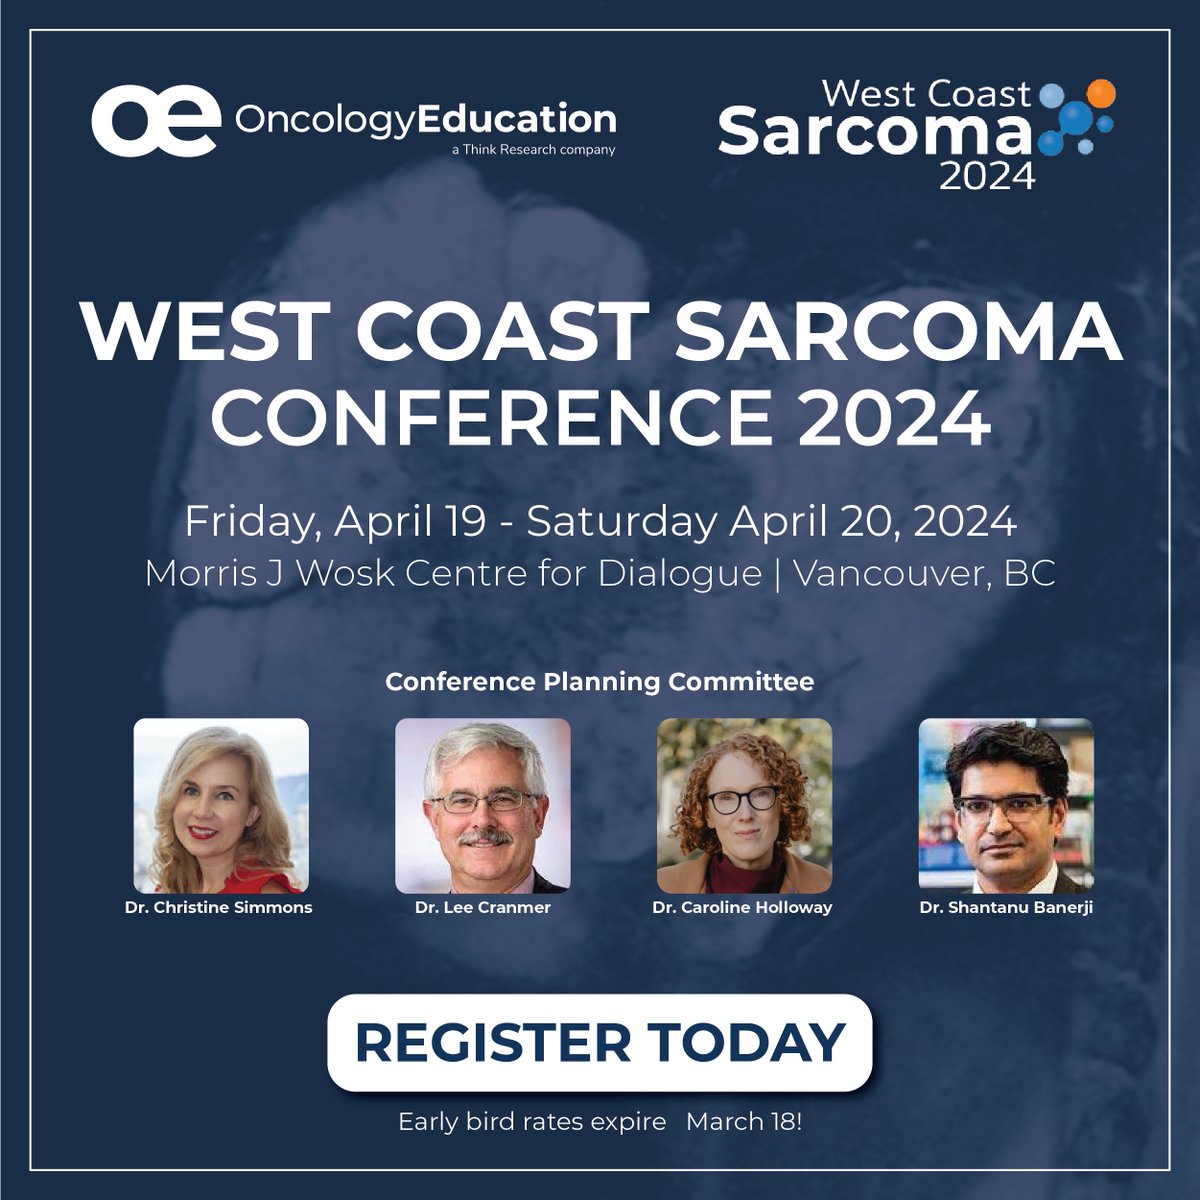 Join us @ West Coast Sarcoma Conference for a comprehensive overview of the latest insights into #sarcoma diagnosis and management, strategies to enhance multidisciplinary treatment and more. ow.ly/C7z750QItXV @DrCESimmons @s_banerji #DrLeeCranmer #DrCarolineHolloway